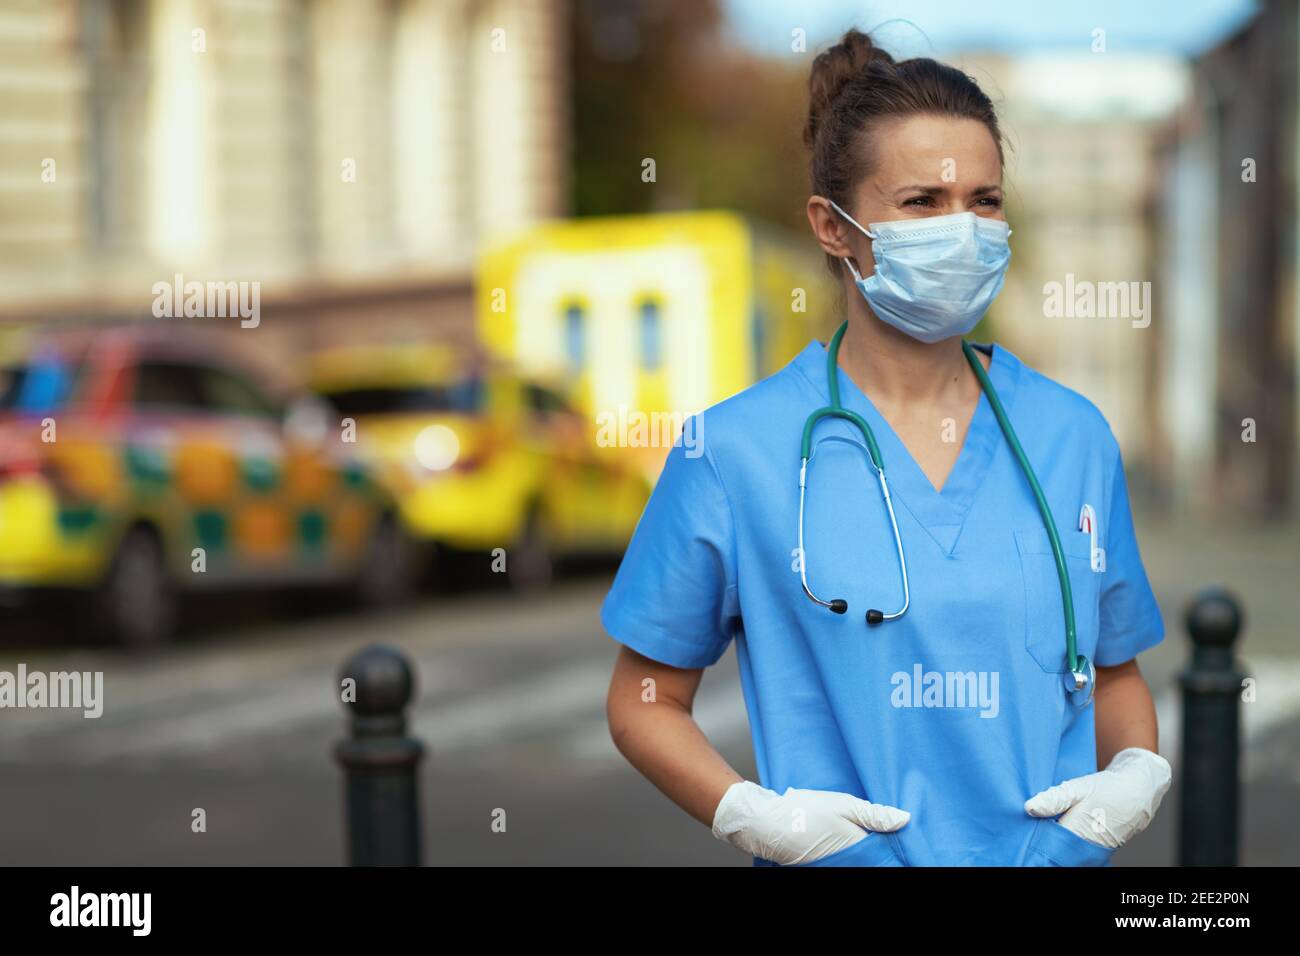 covid-19 pandemic. modern medical doctor woman in uniform with stethoscope and medical mask looking into the distance outside near ambulance. Stock Photo